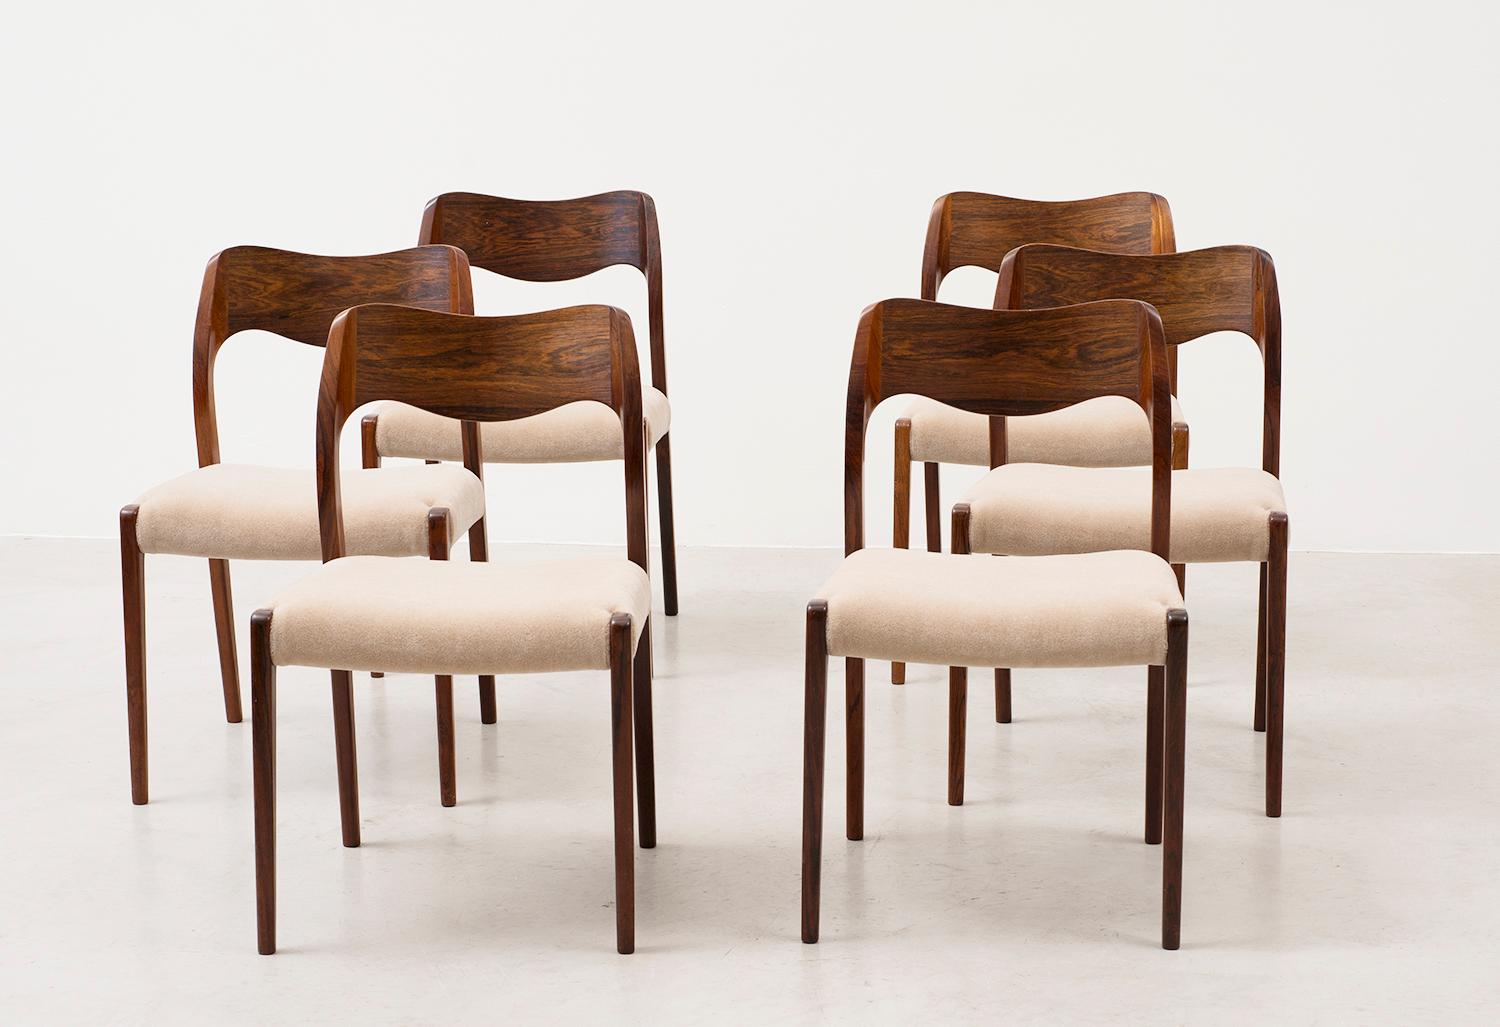 Stunning set of six Niels Moller dining chairs model #71. Solid rosewood frames, seats reupholstered in a sumptuous Leo Schellens champagne mohair velvet. Denmark, 1950s.

Matching dining table available in separate listing.